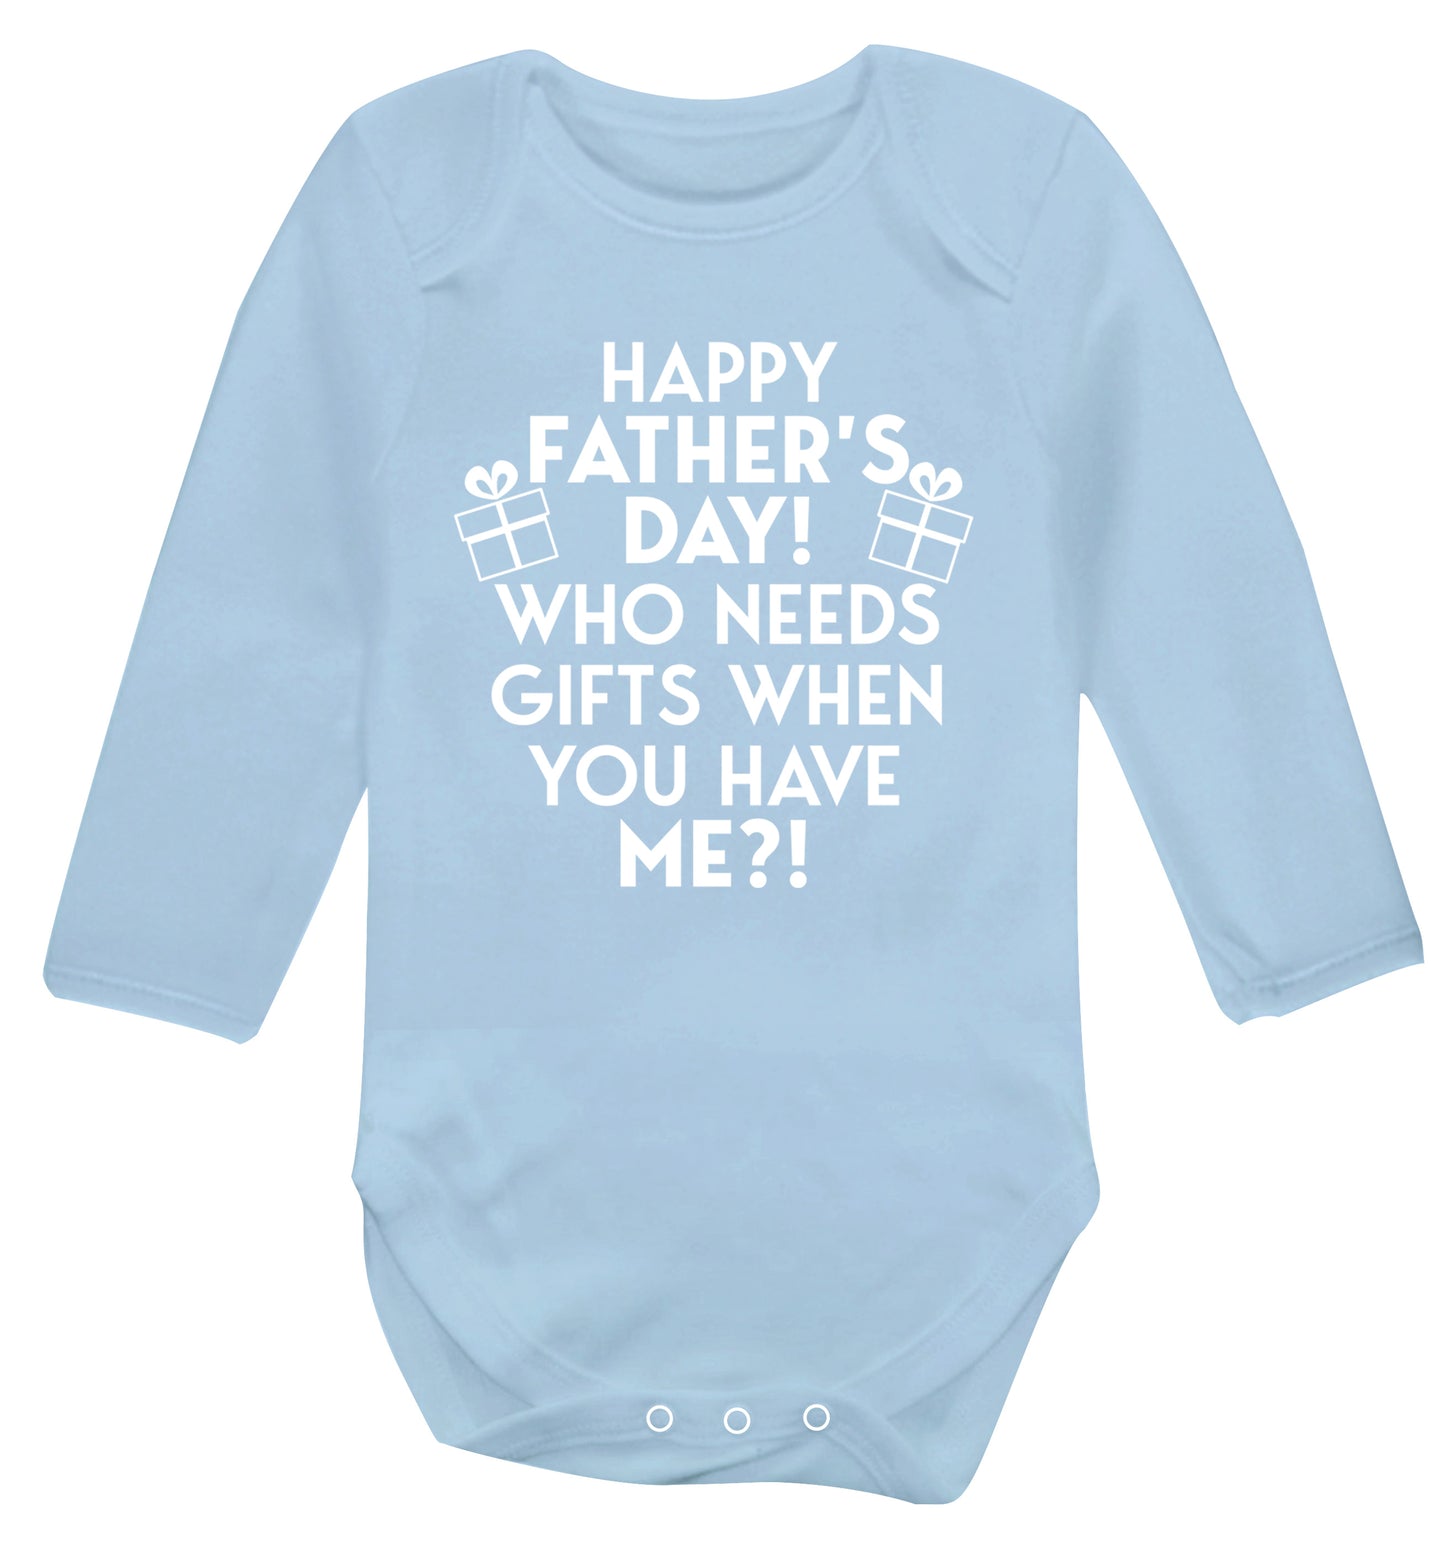 Happy Father's day, who needs a present when you have me Baby Vest long sleeved pale blue 6-12 months